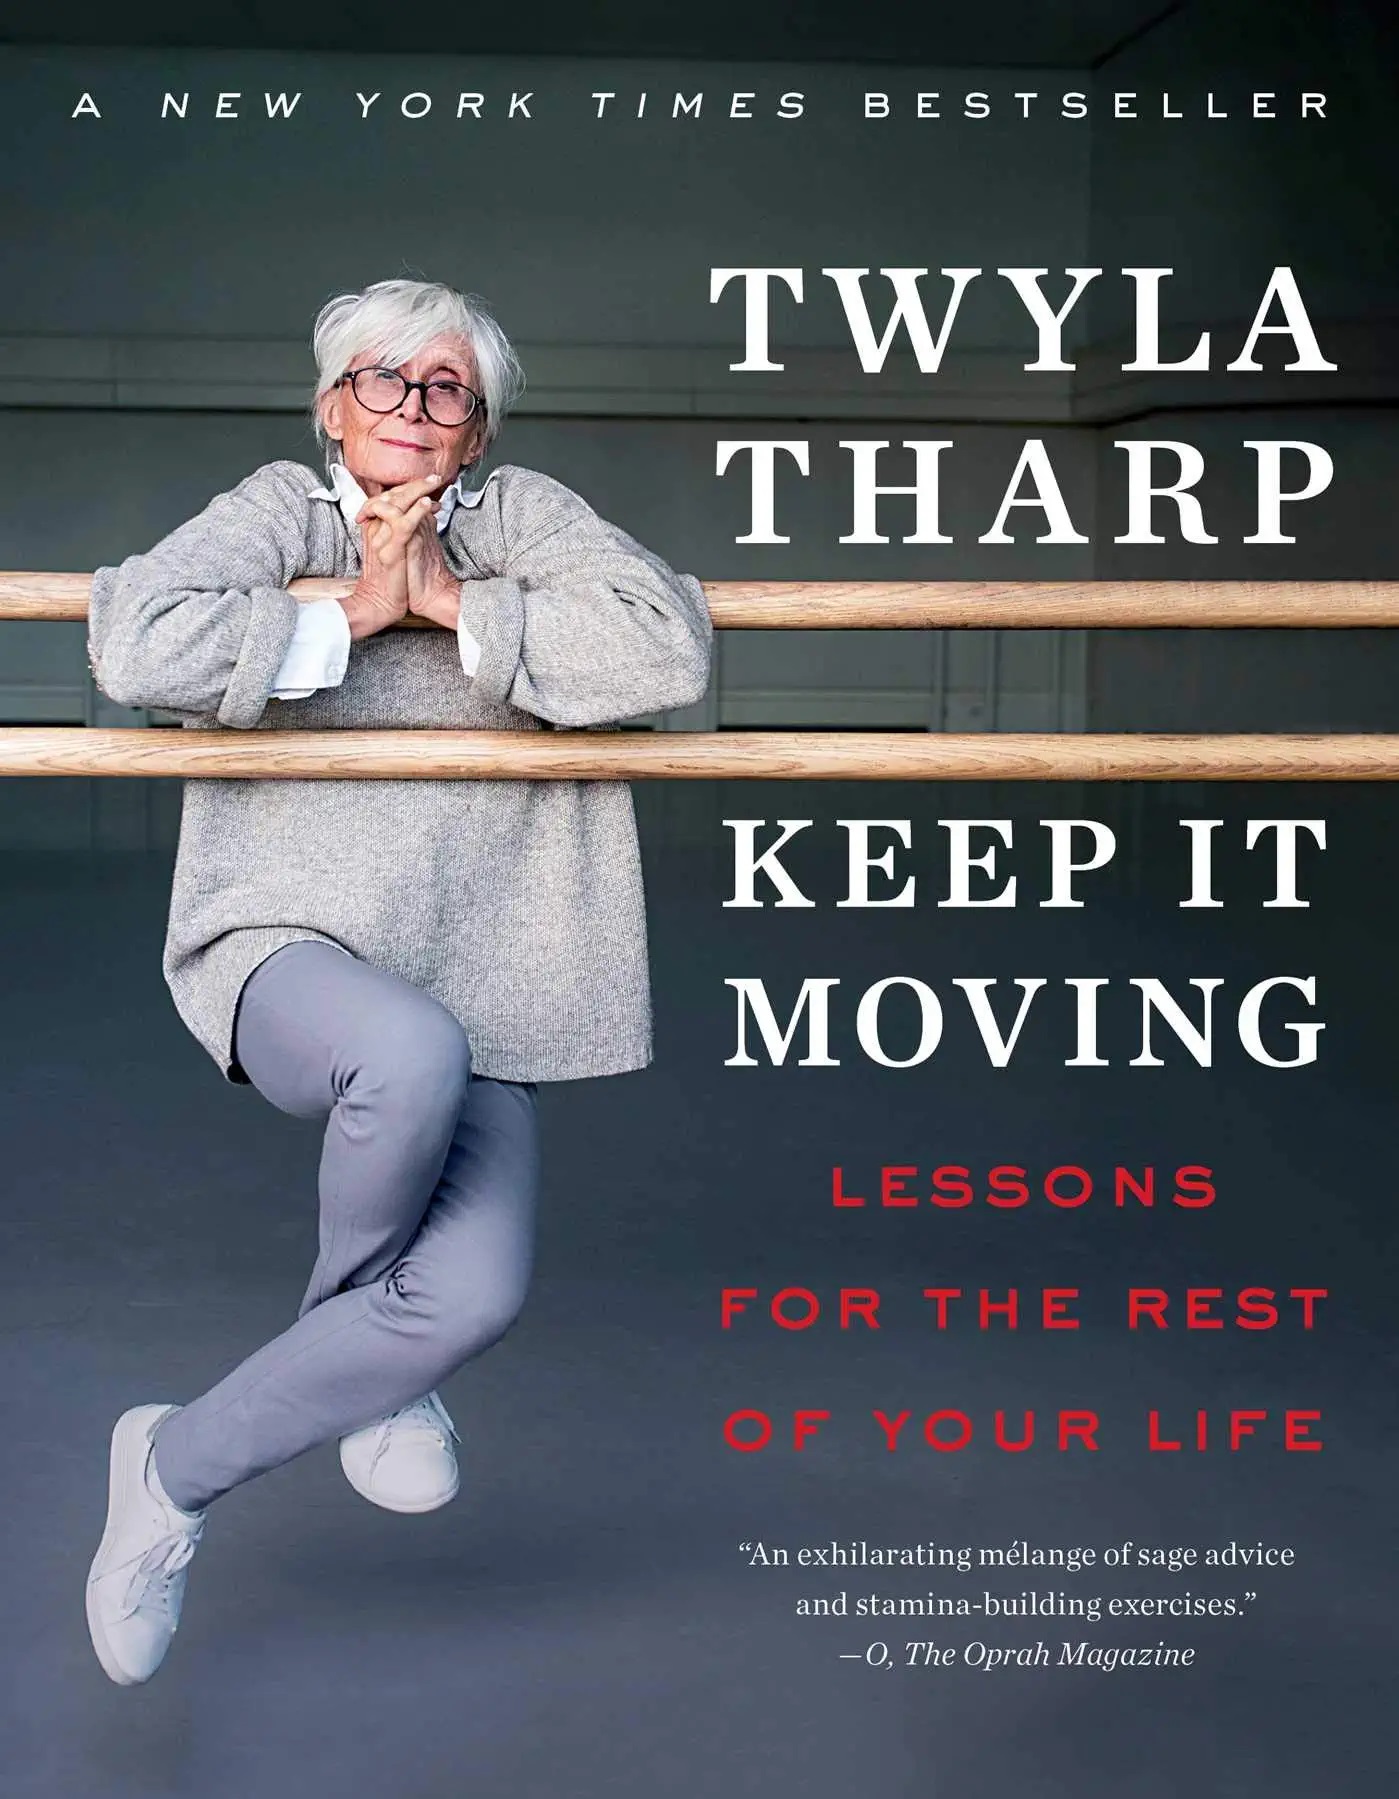 Keep it moving by Twyla Tharp